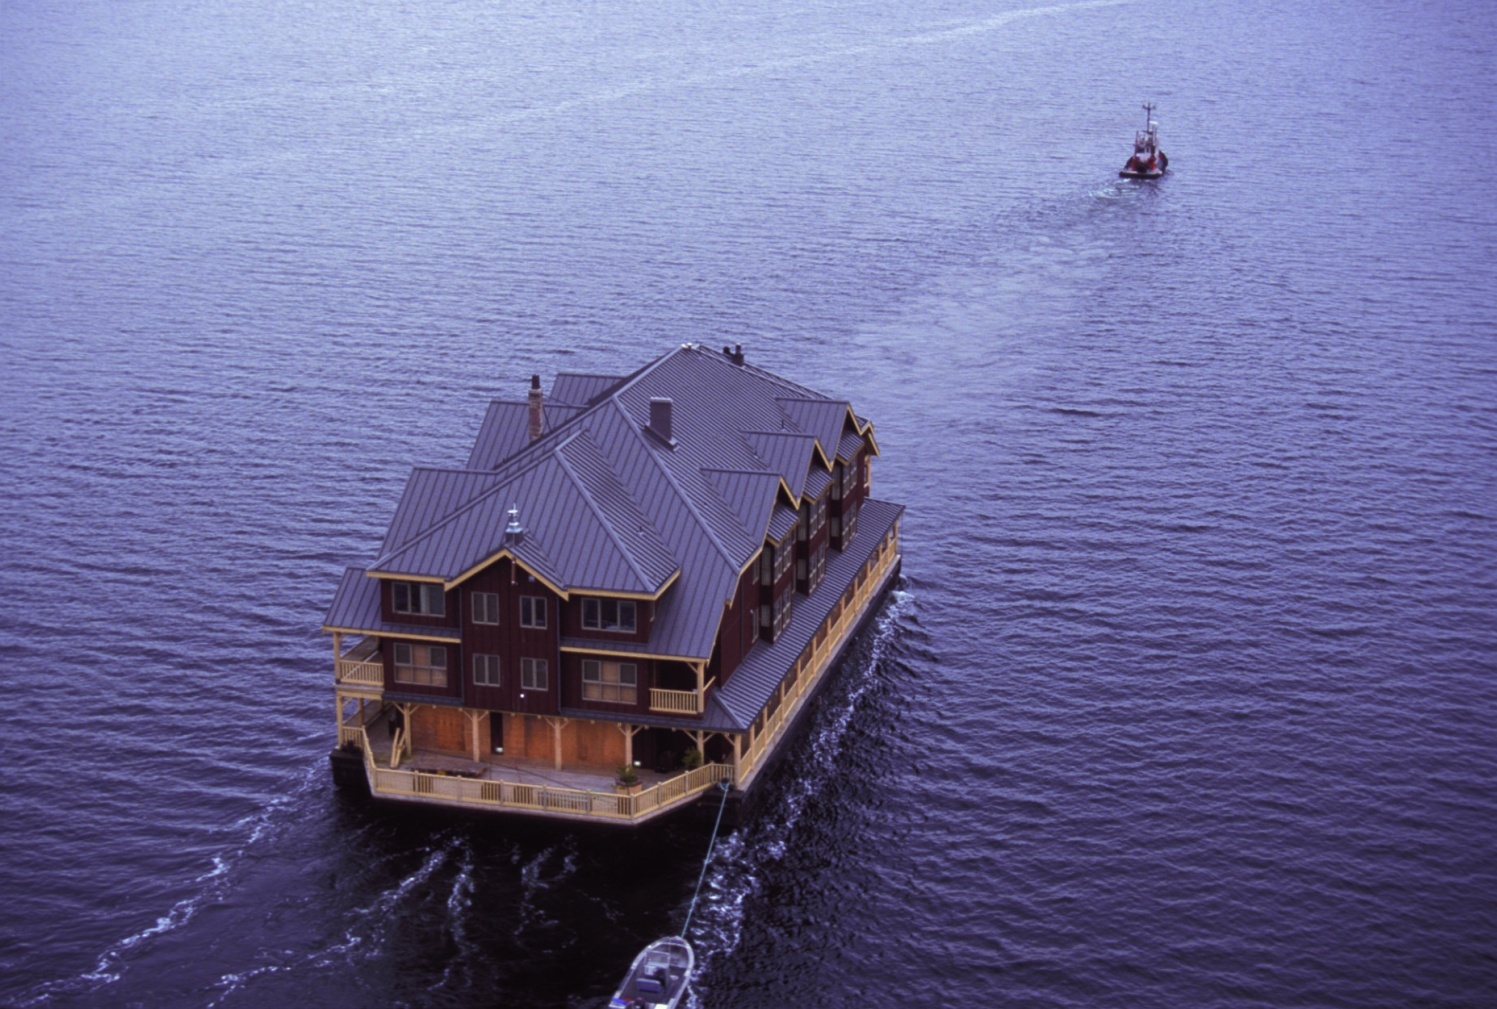 King Pacific Lodge - Luxurious Floating Barge In The Great Bear